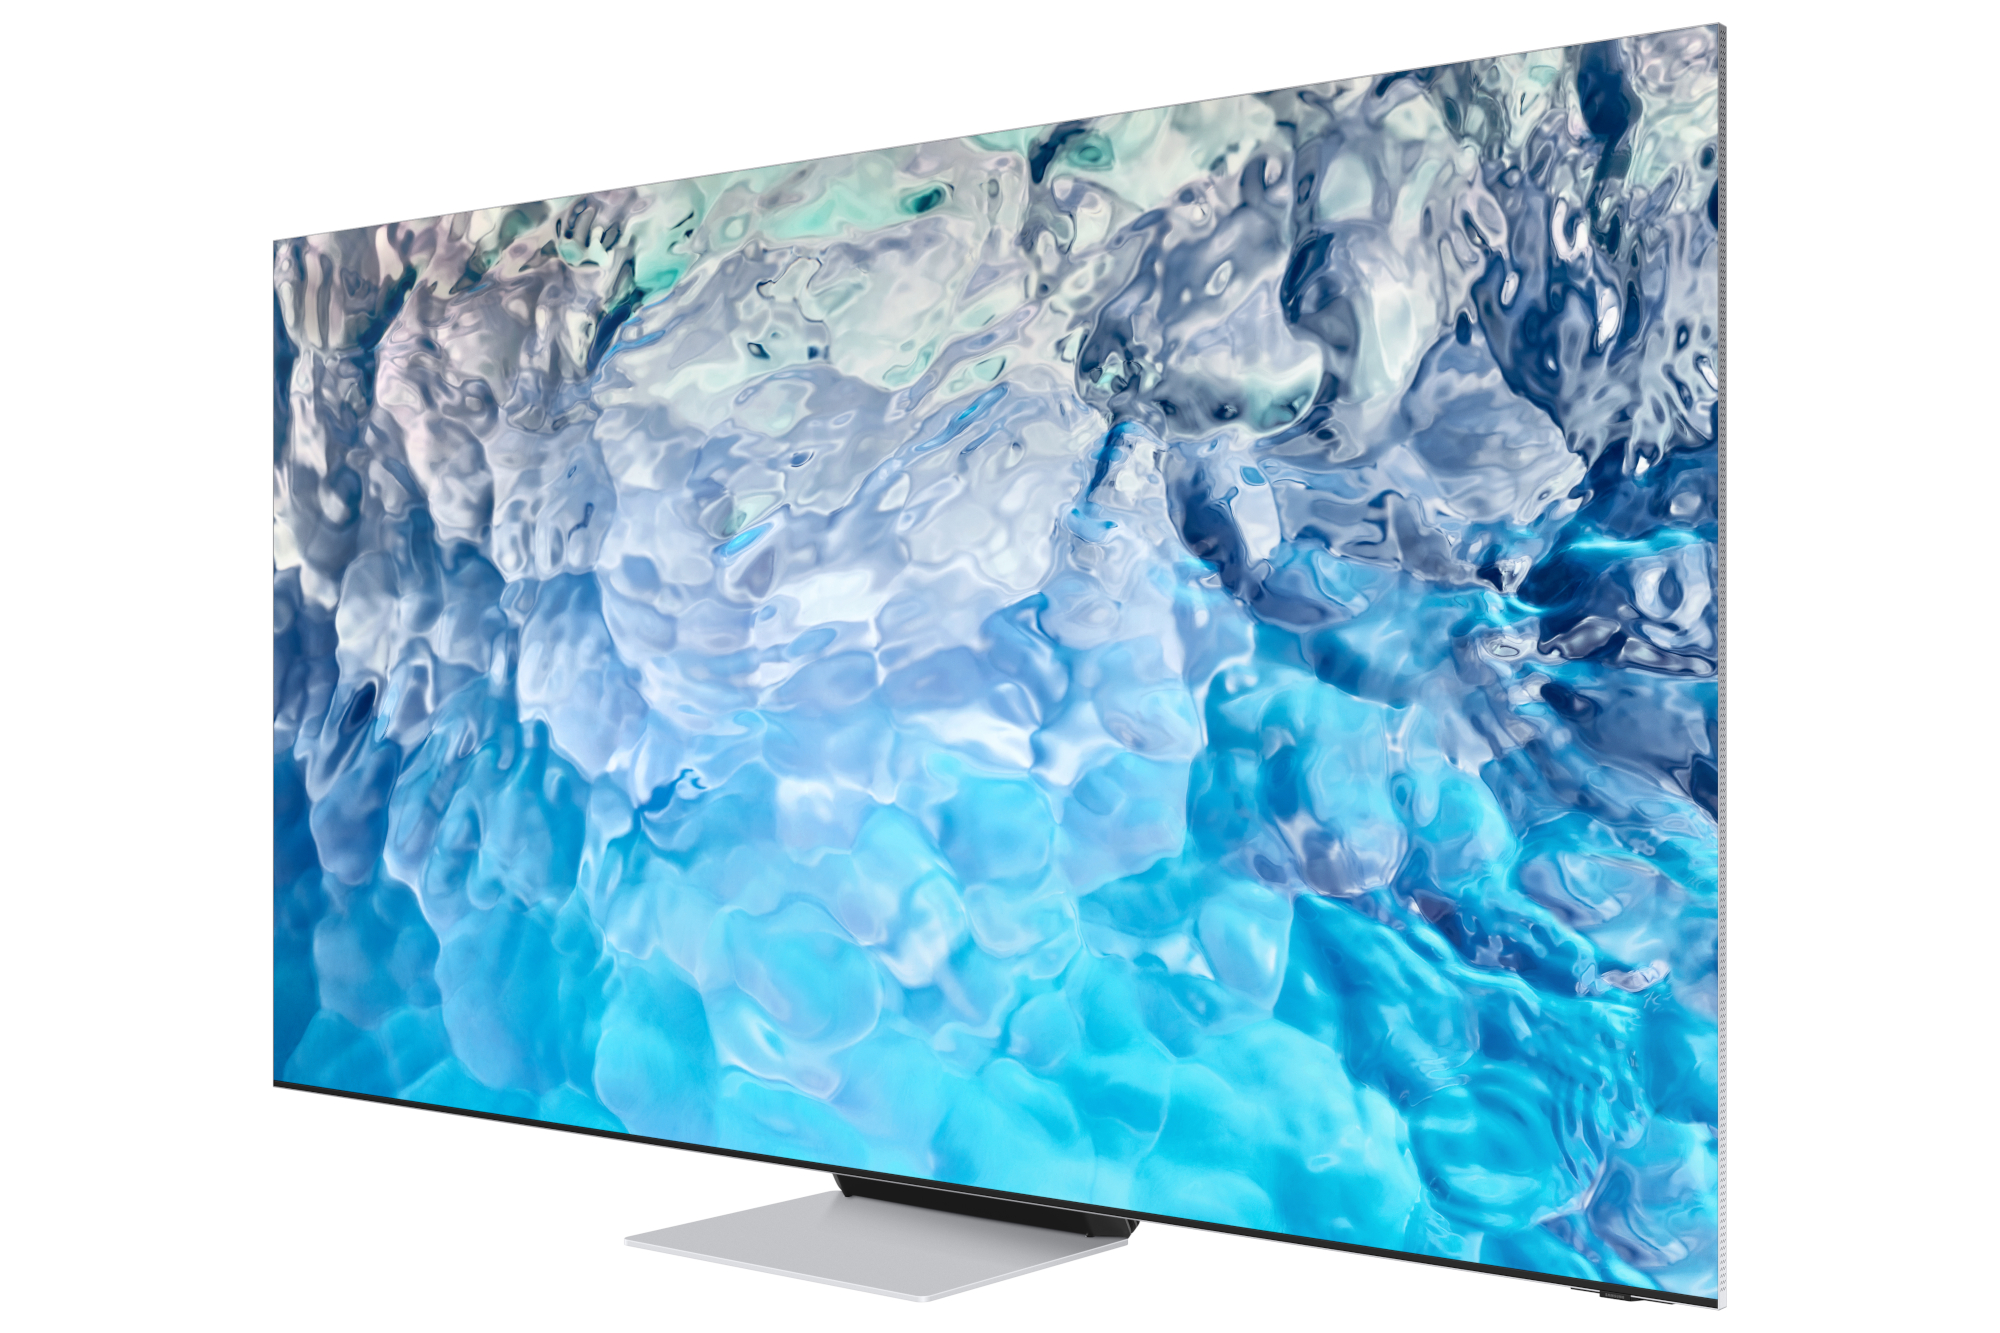 Courageous Proof Plausible Best TVs for 2022: Reviews and buying advice | TechHive